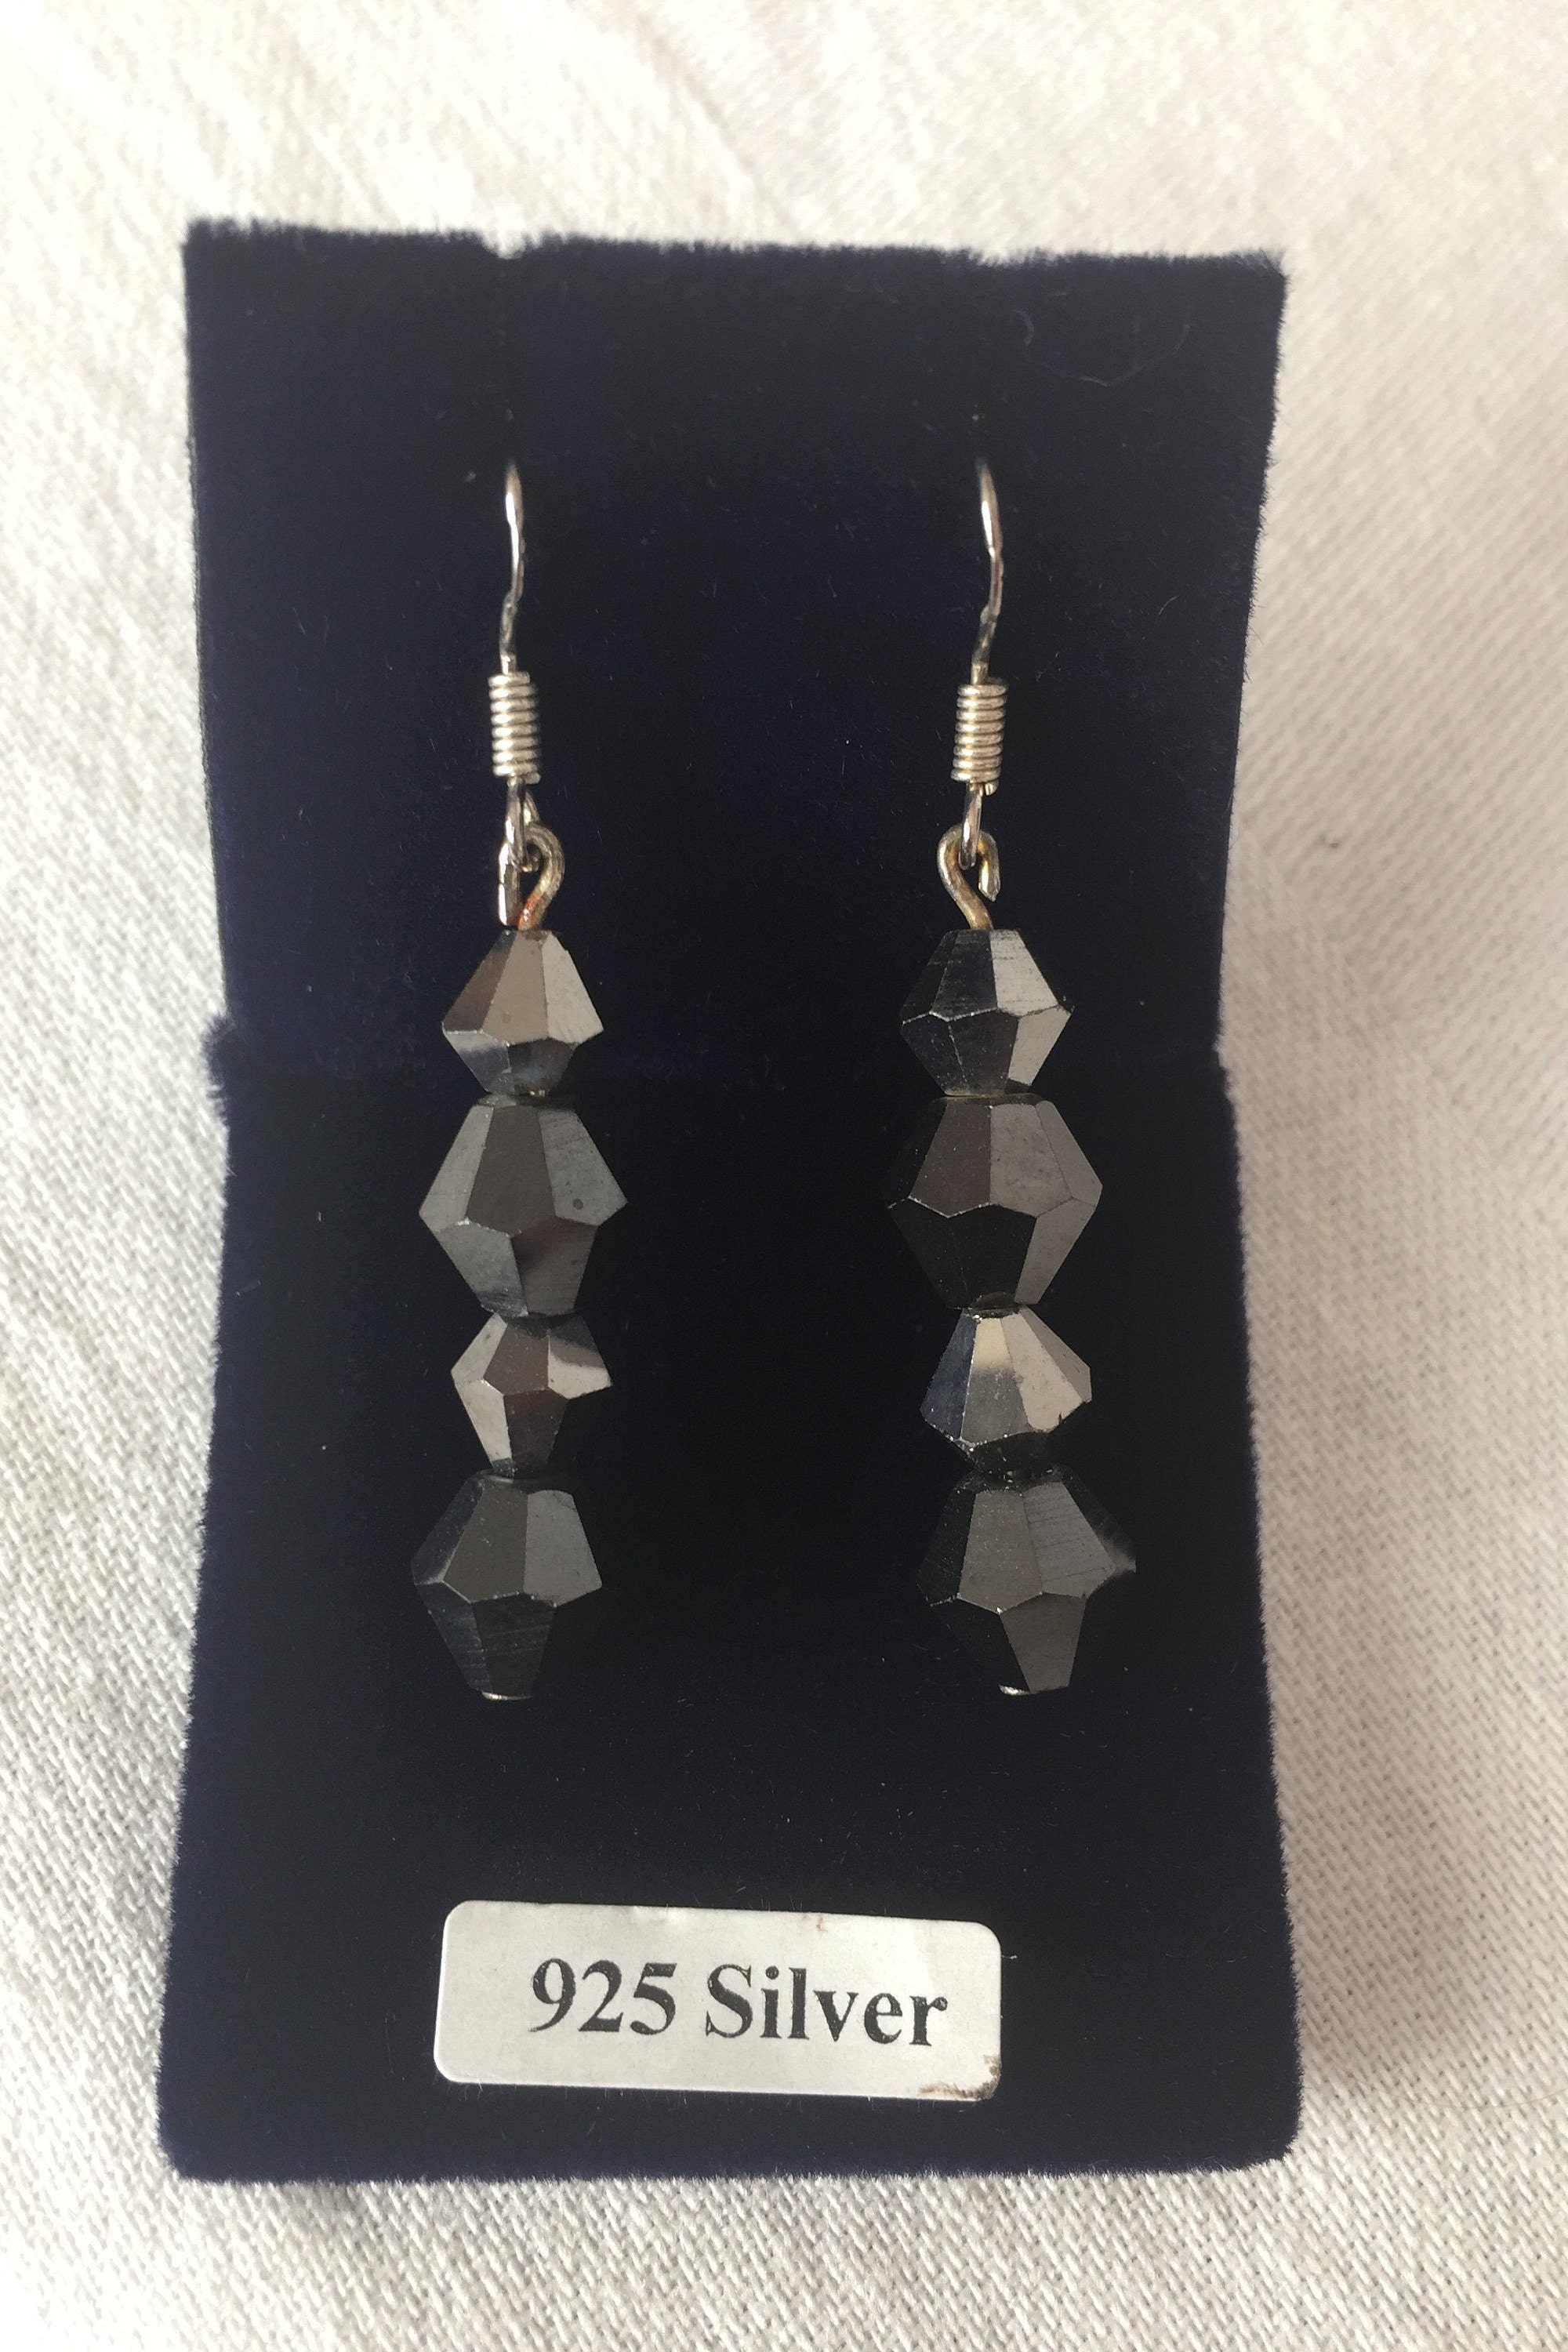 Black Bicone Rondelle Drop Earrings with Sterling Silver Hooks, One-off Design, UK Shop